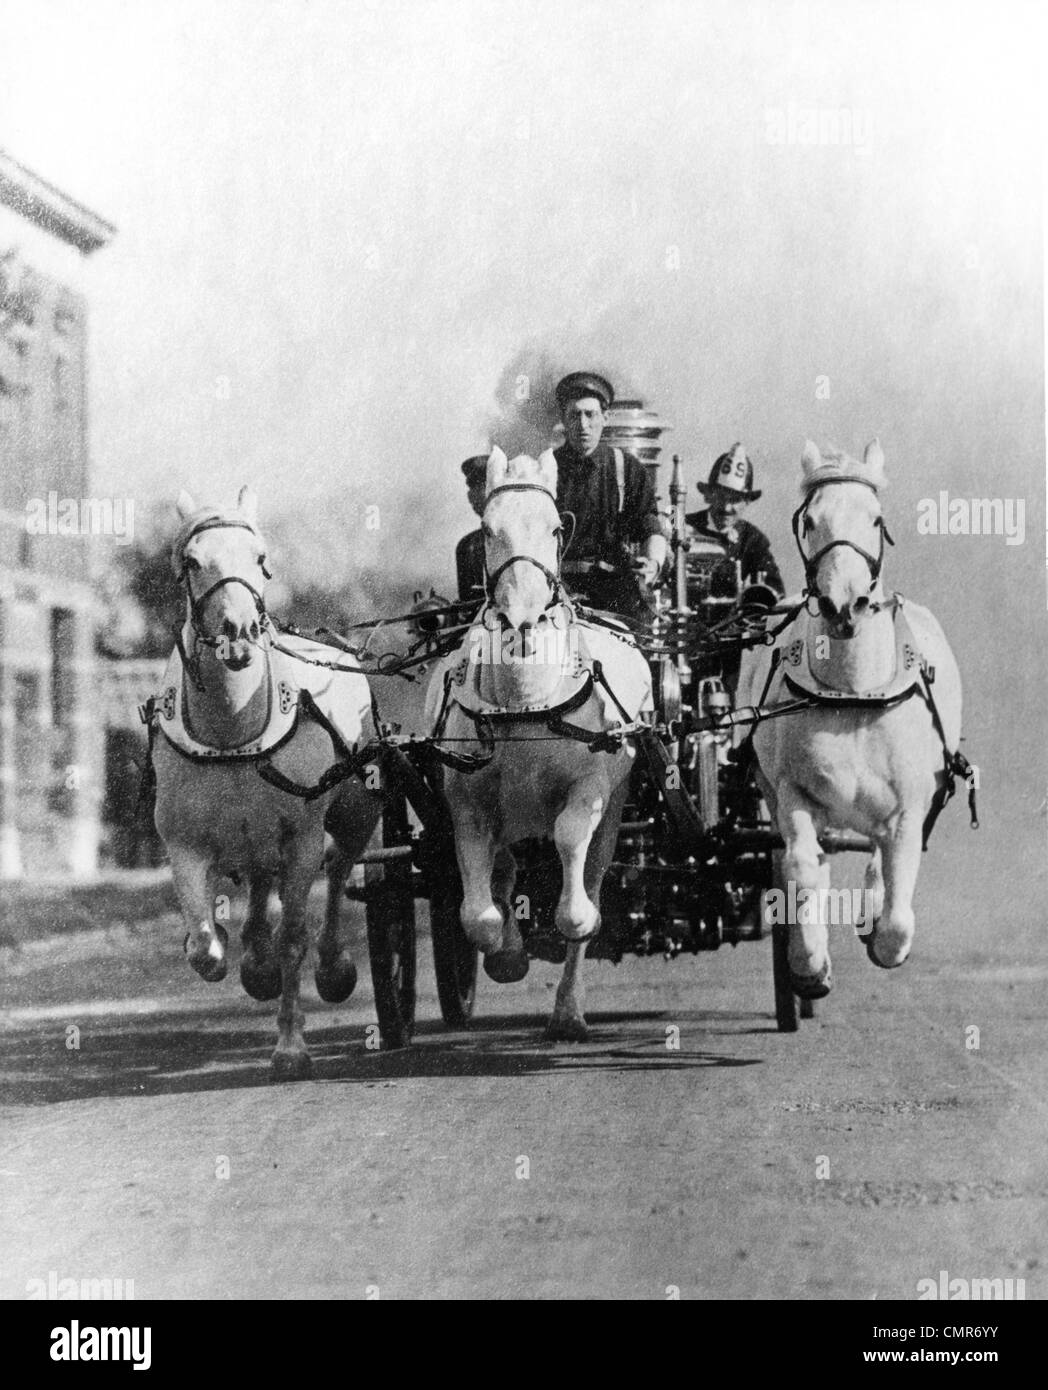 1890s 1900s OLD-TIME HEAD-ON SHOT OF HORSE-DRAWN FIRE TRUCK RACING DOWN STREET Stock Photo